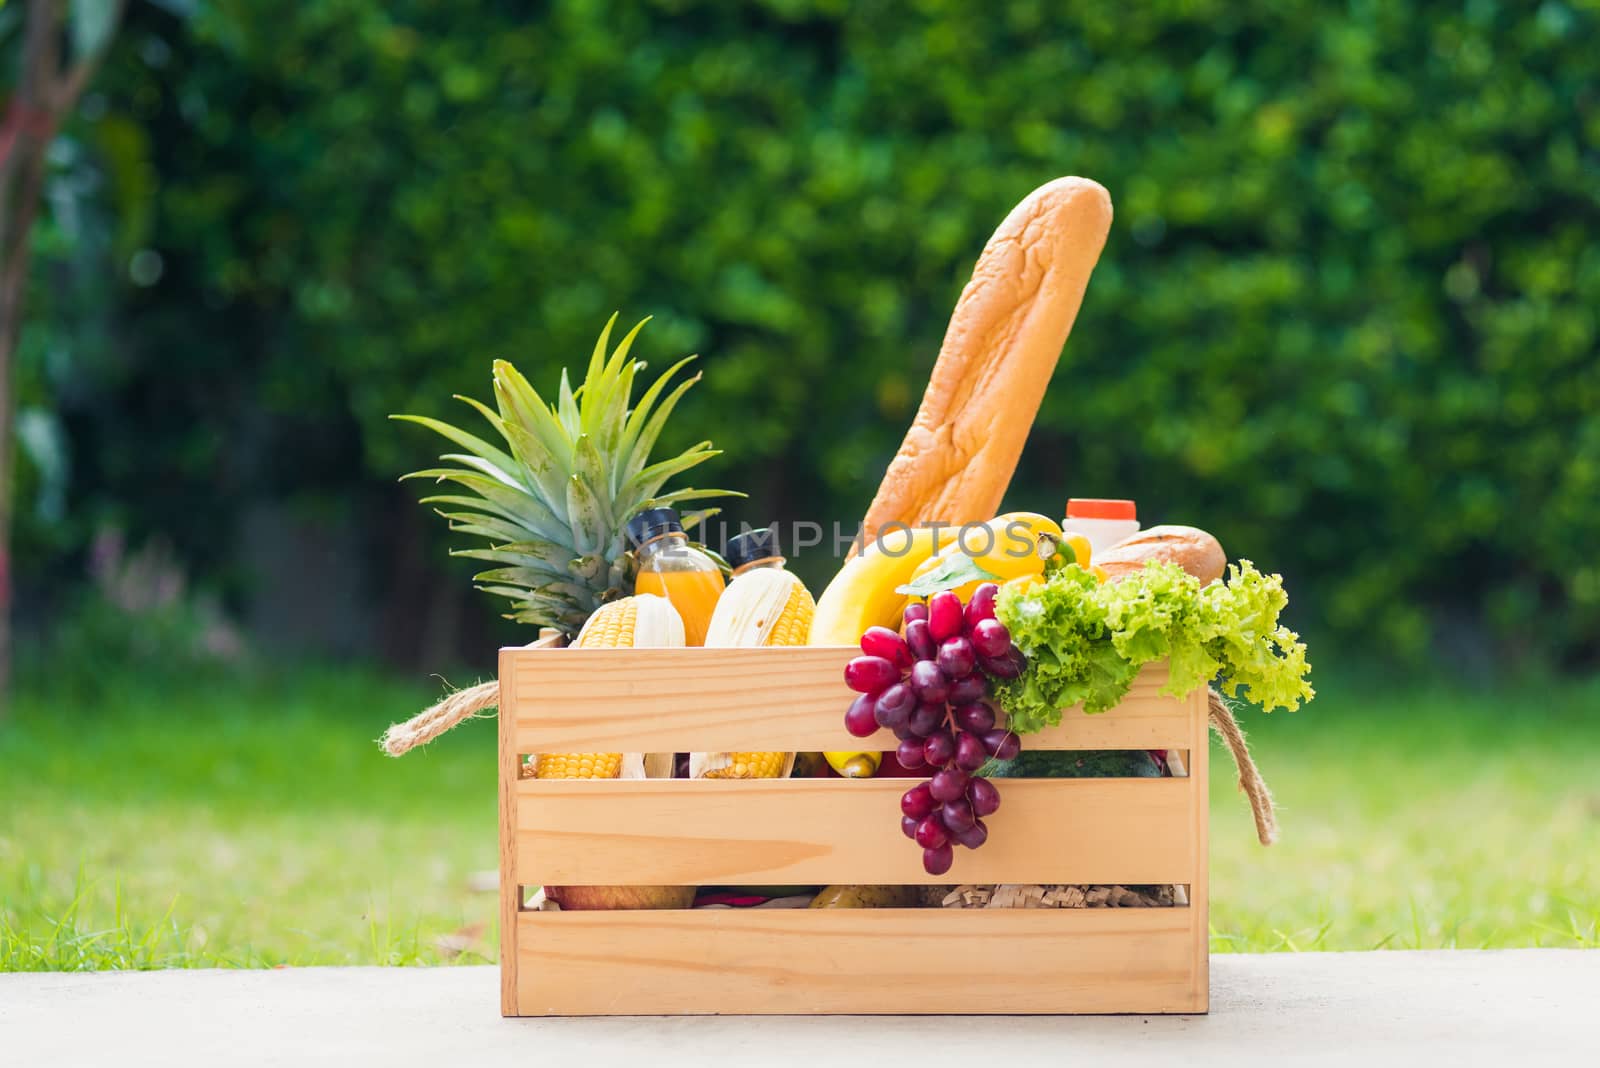 Full fresh vegetables and fruits in crate wood box by Sorapop